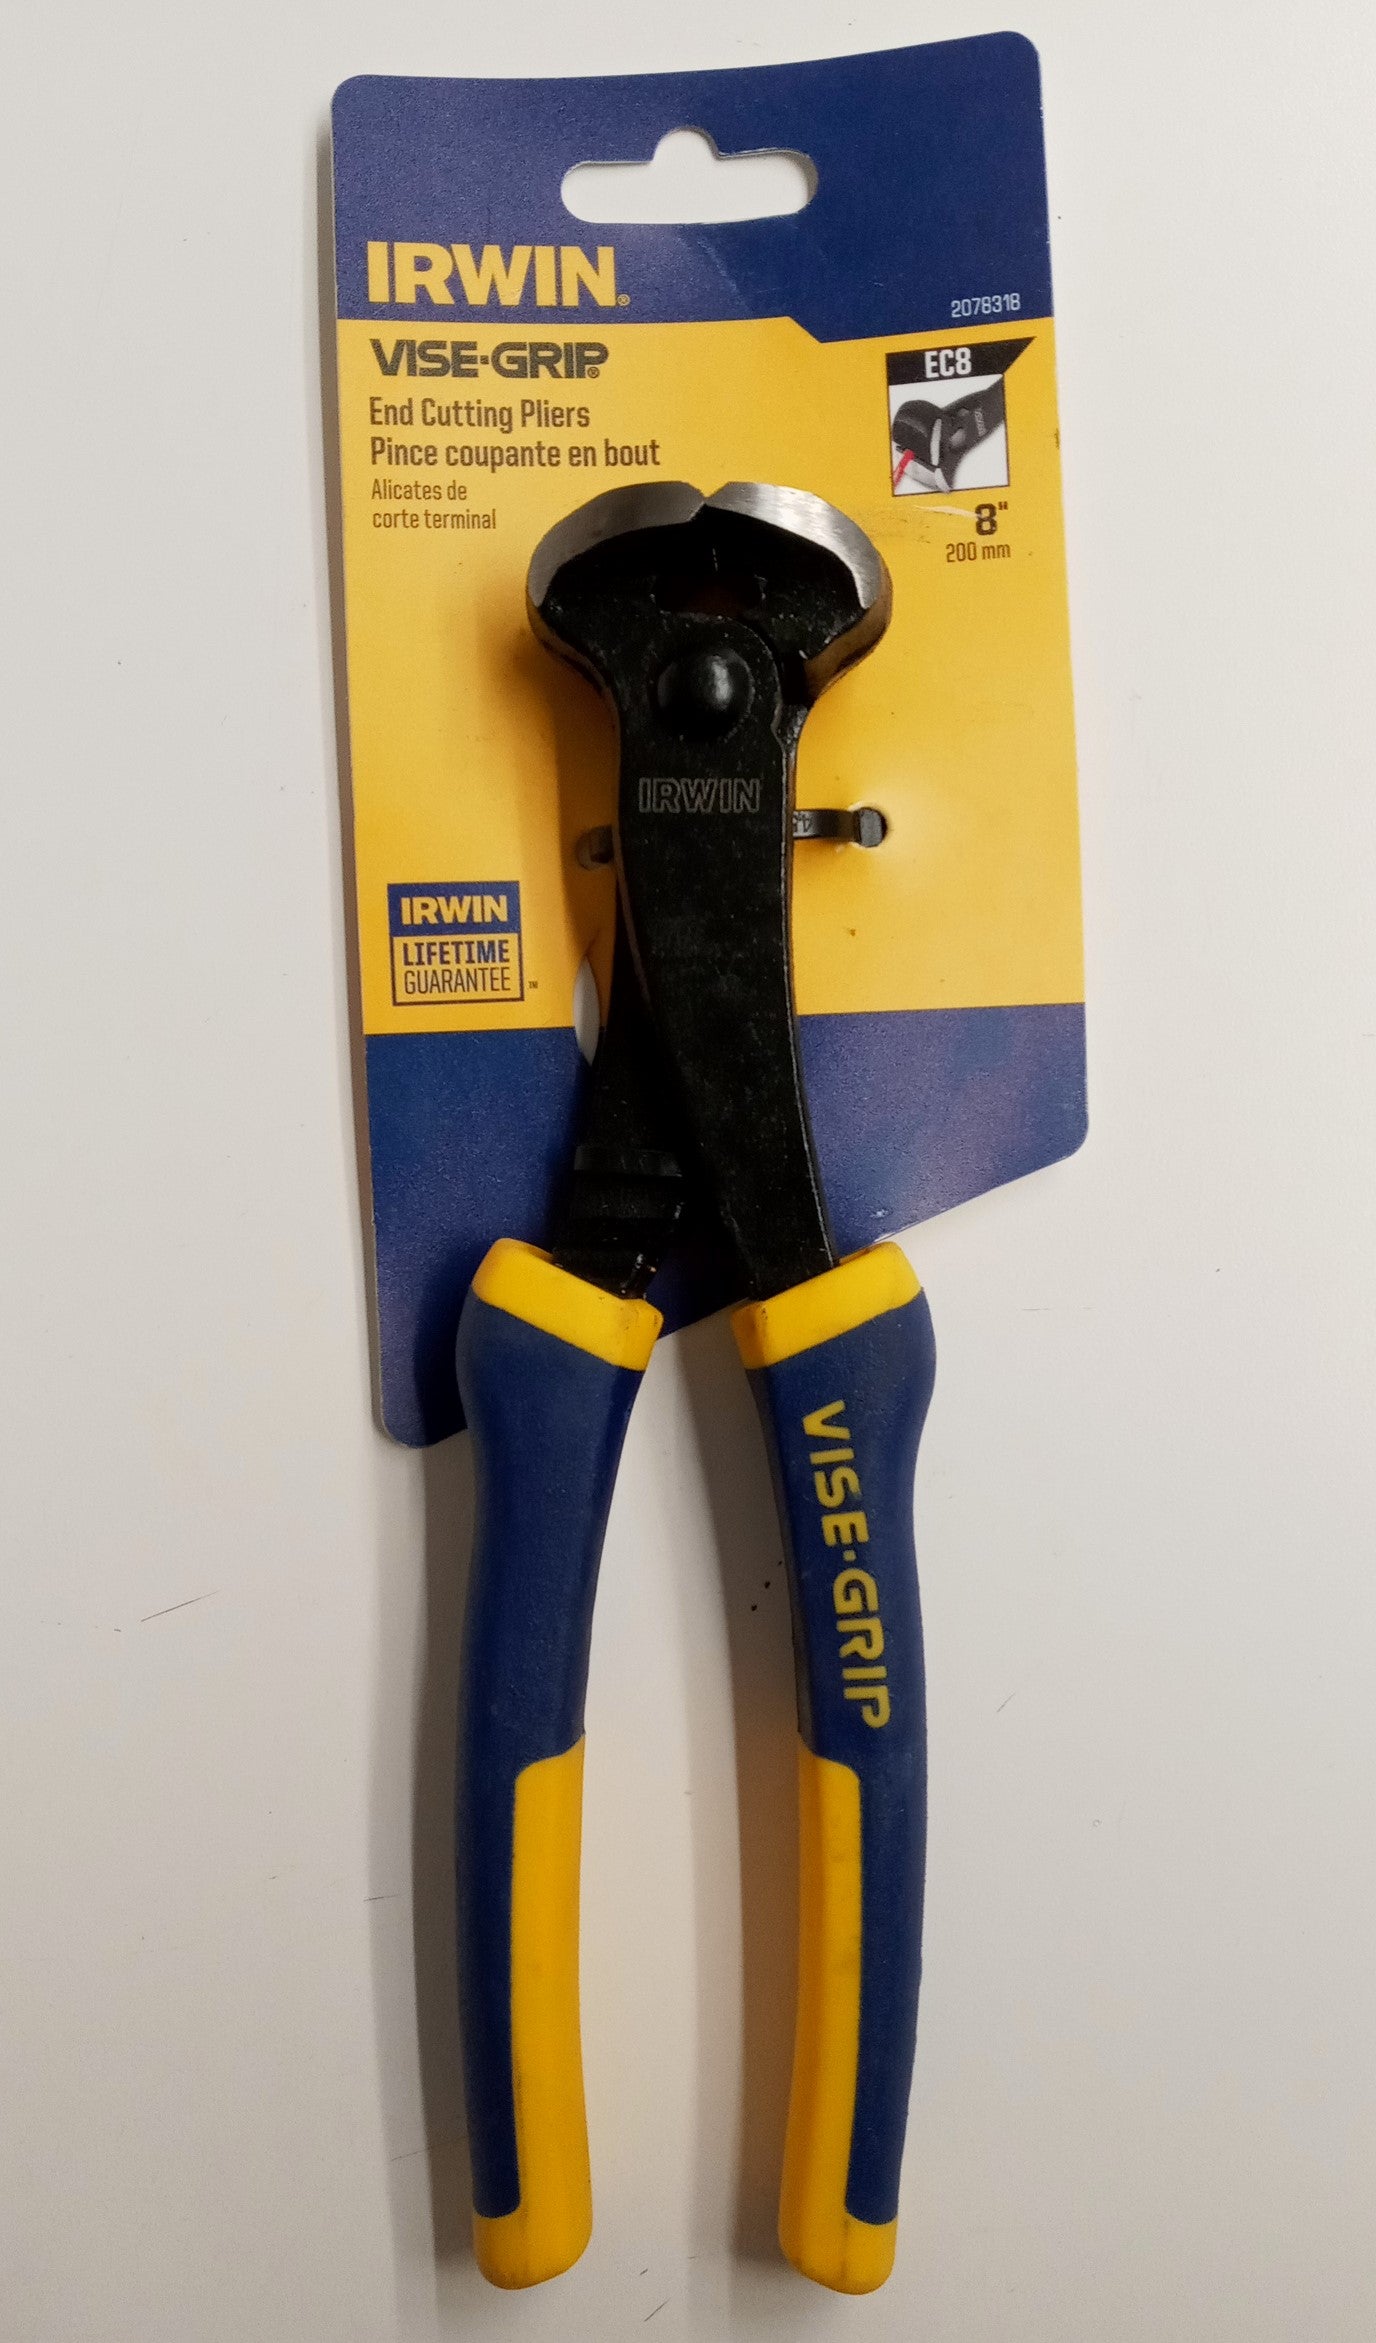 Irwin 2078318 Vise-Grip 8 in. End Cutting Pliers